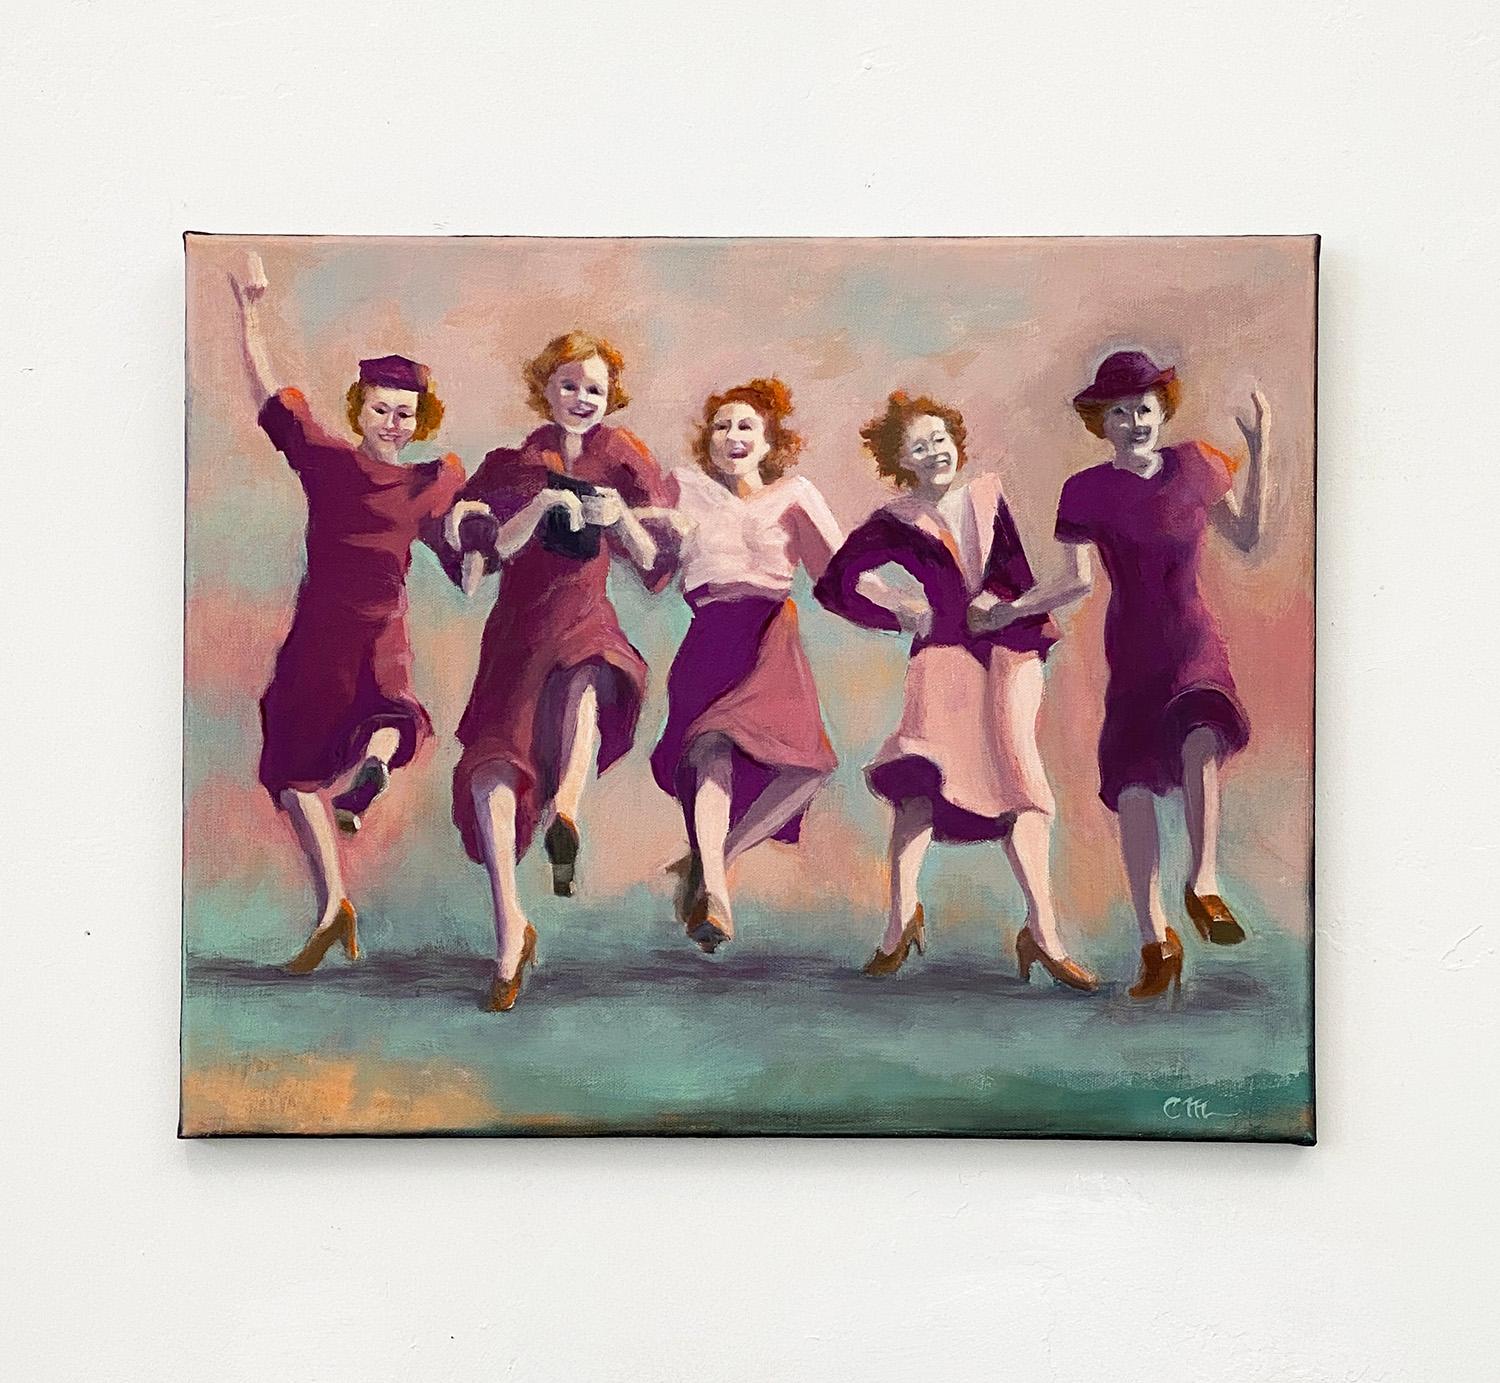 <p>Artist Comments<br />This painting draws inspiration from an old photograph from 1945, capturing a joyous moment of five ladies holding hands in celebration. Their faces light up with smiles and laughter, radiating an infectious delight. The